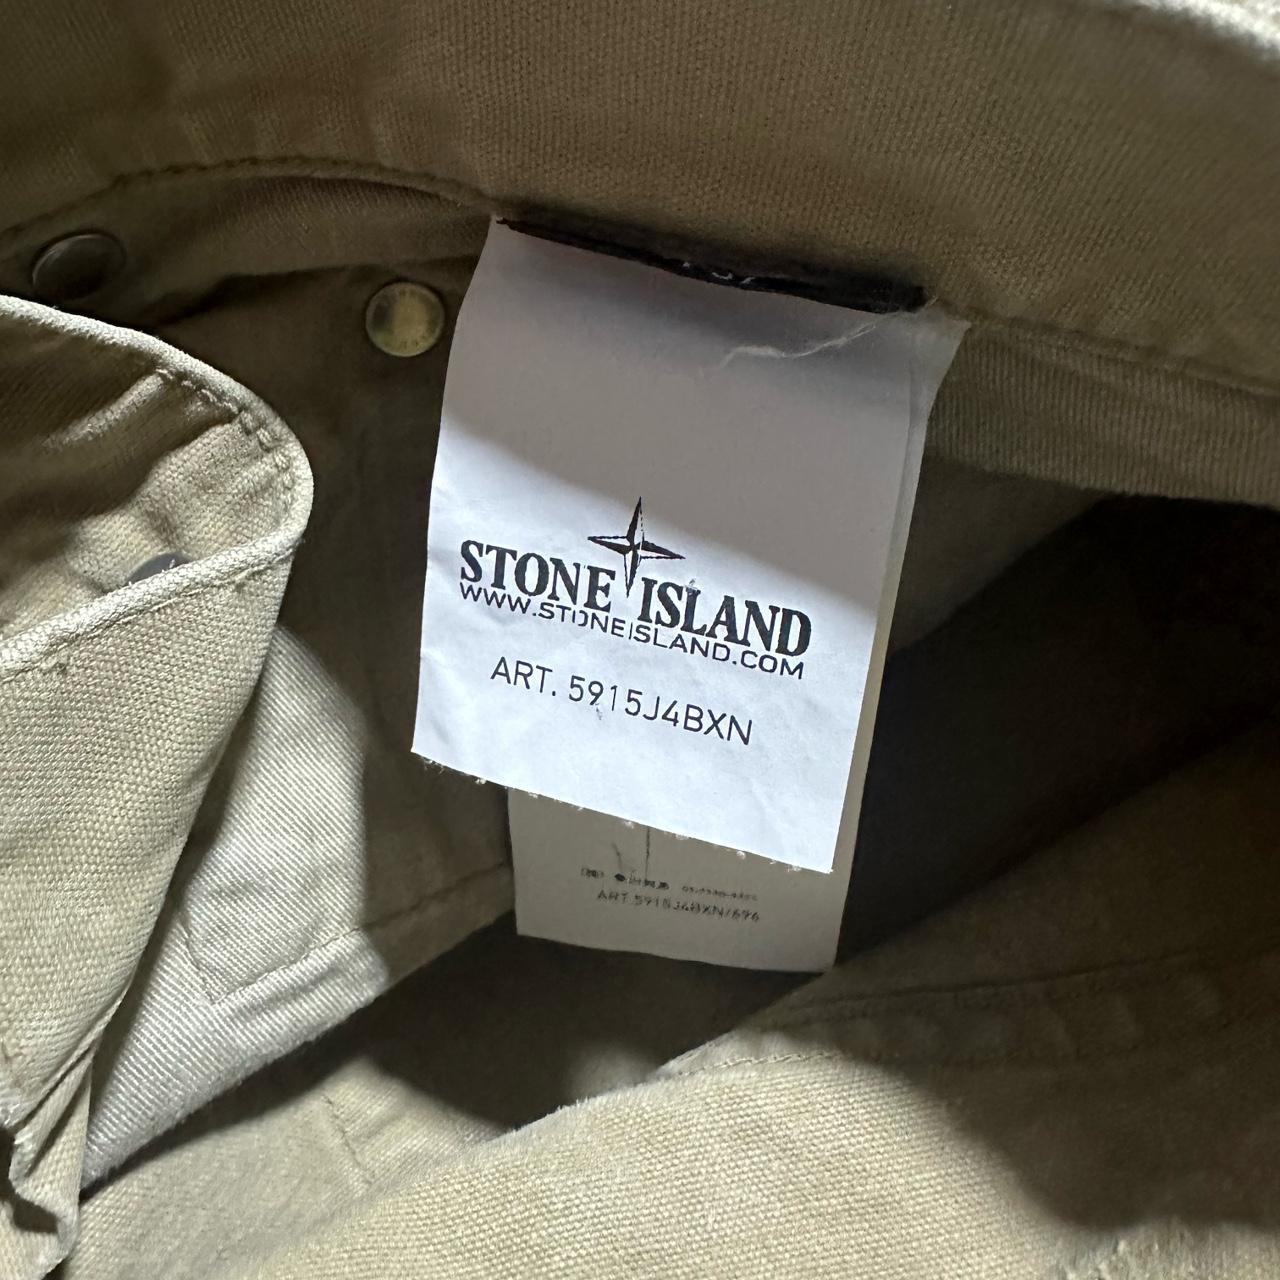 Stone Island Chino Bottoms Discontinued with Iconic Compass